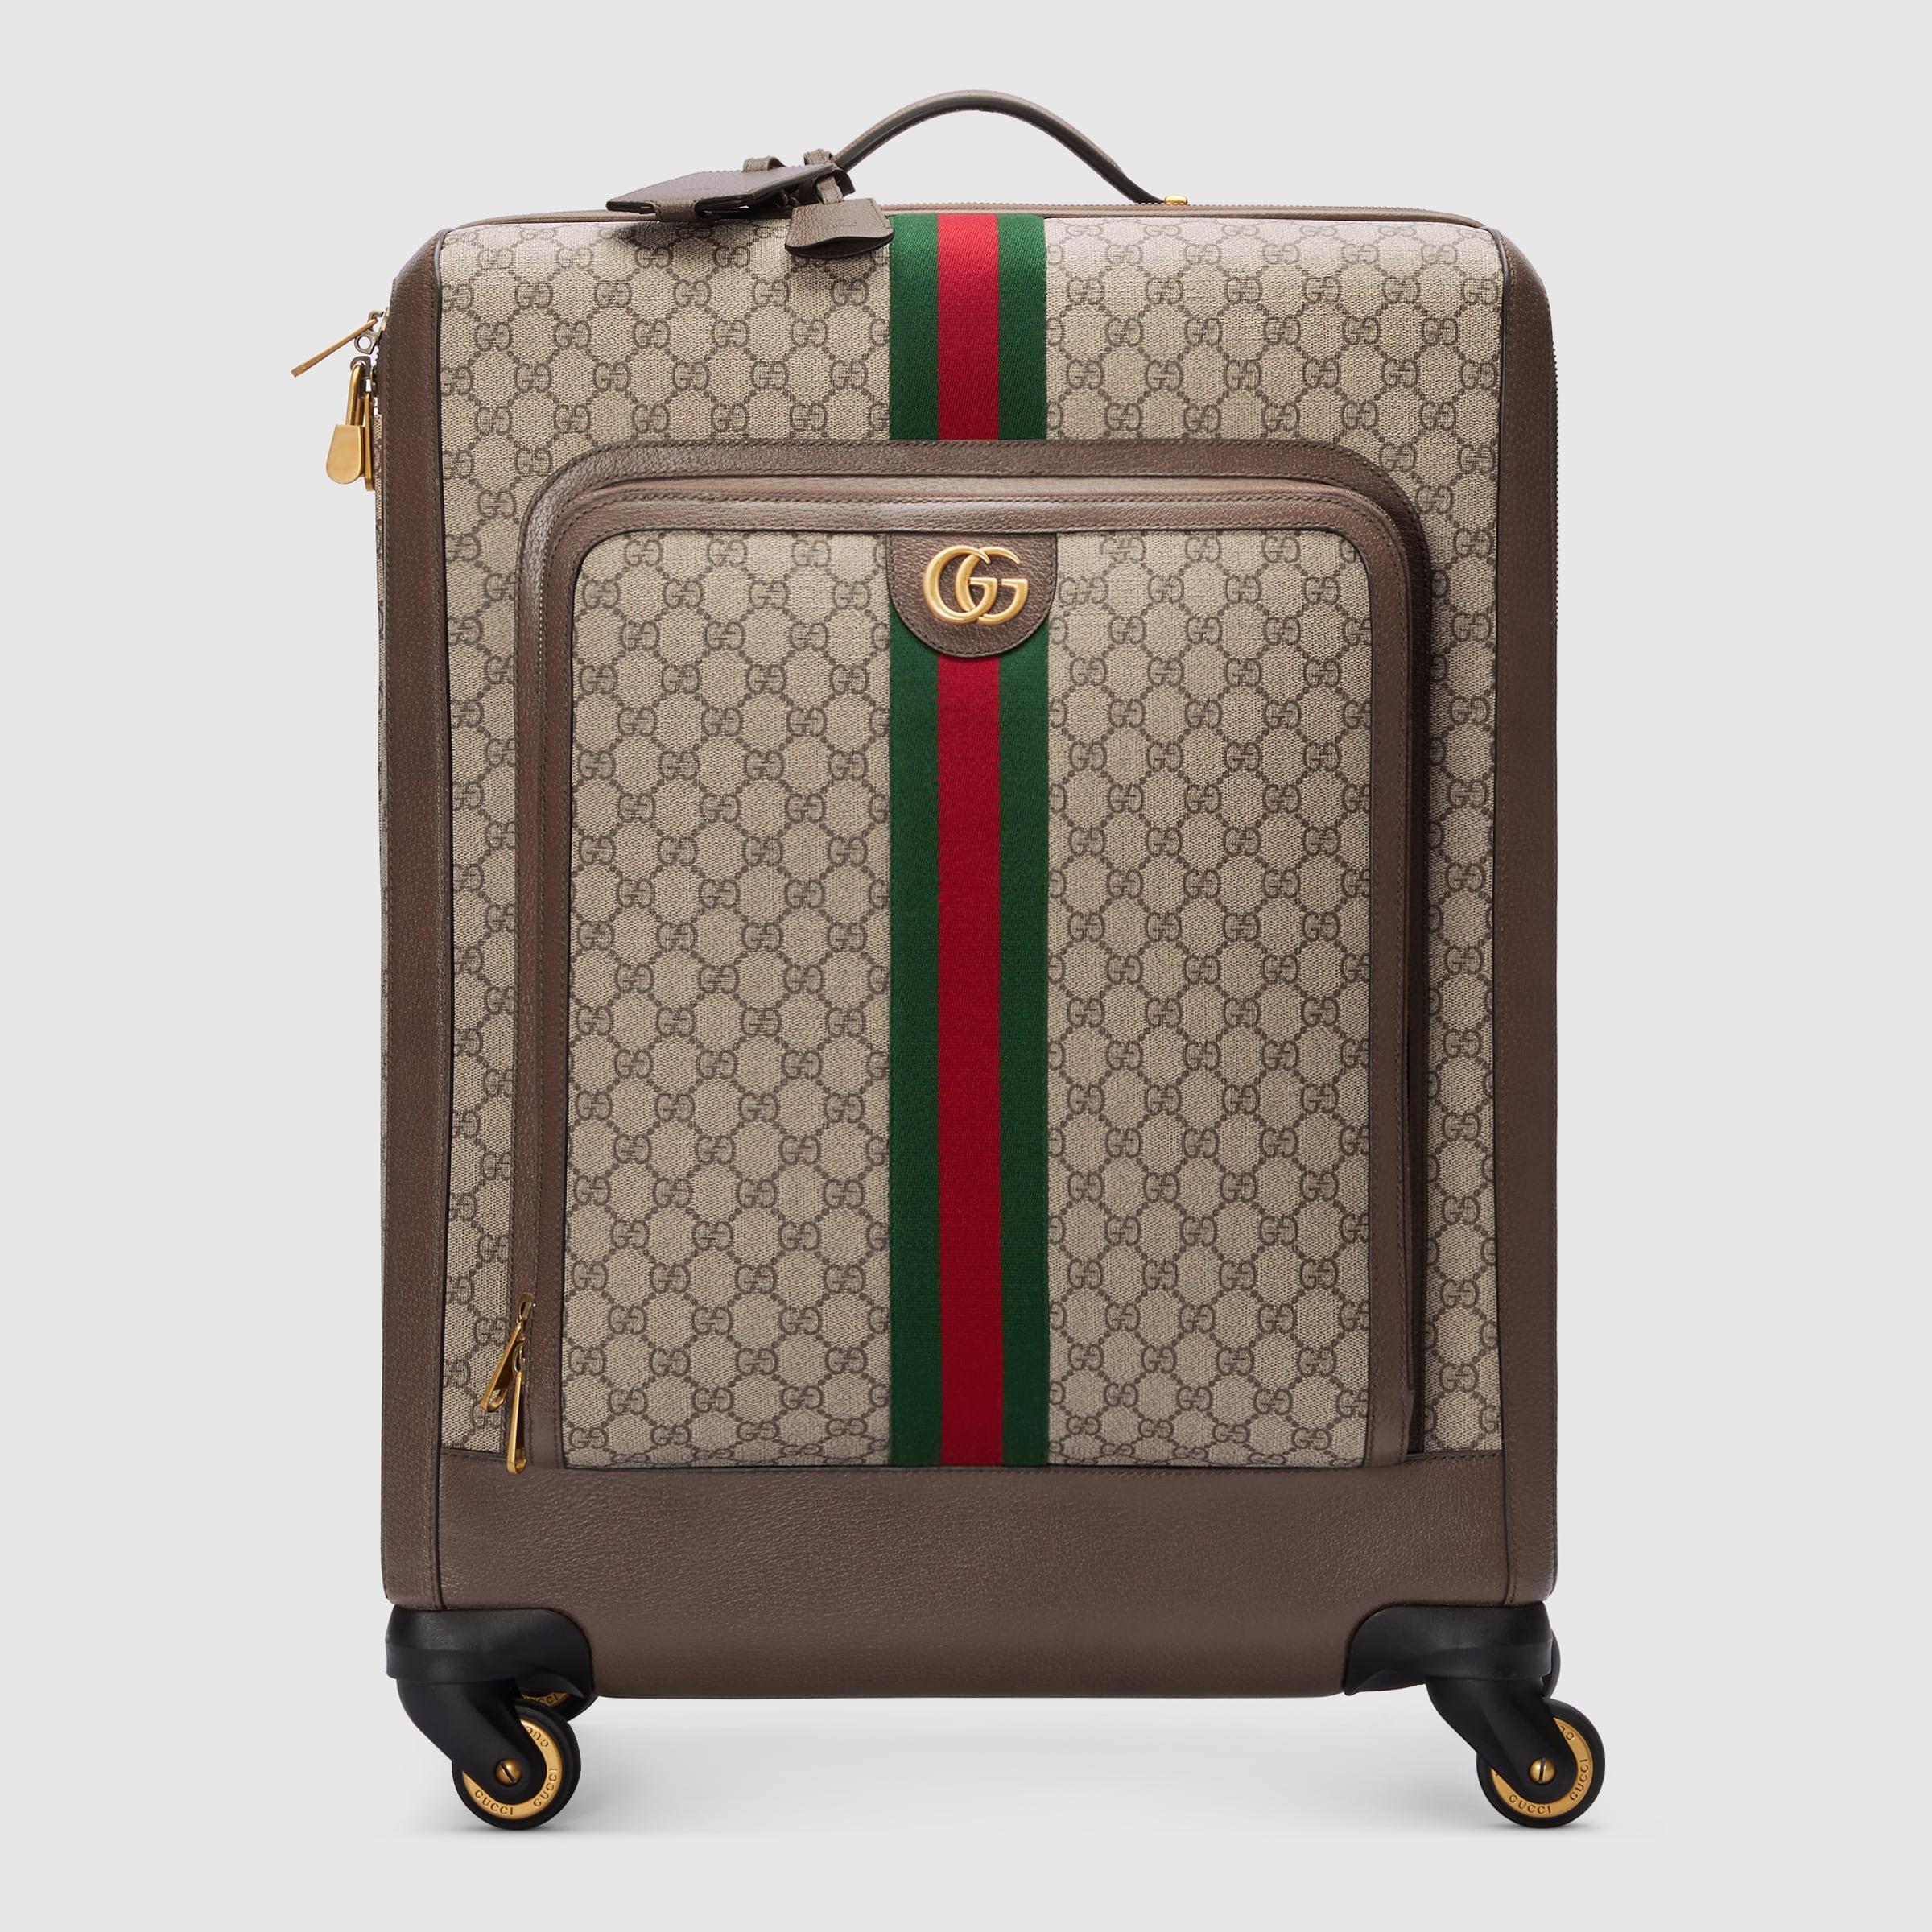 Gucci Savoy large duffle bag in beige and ebony Supreme